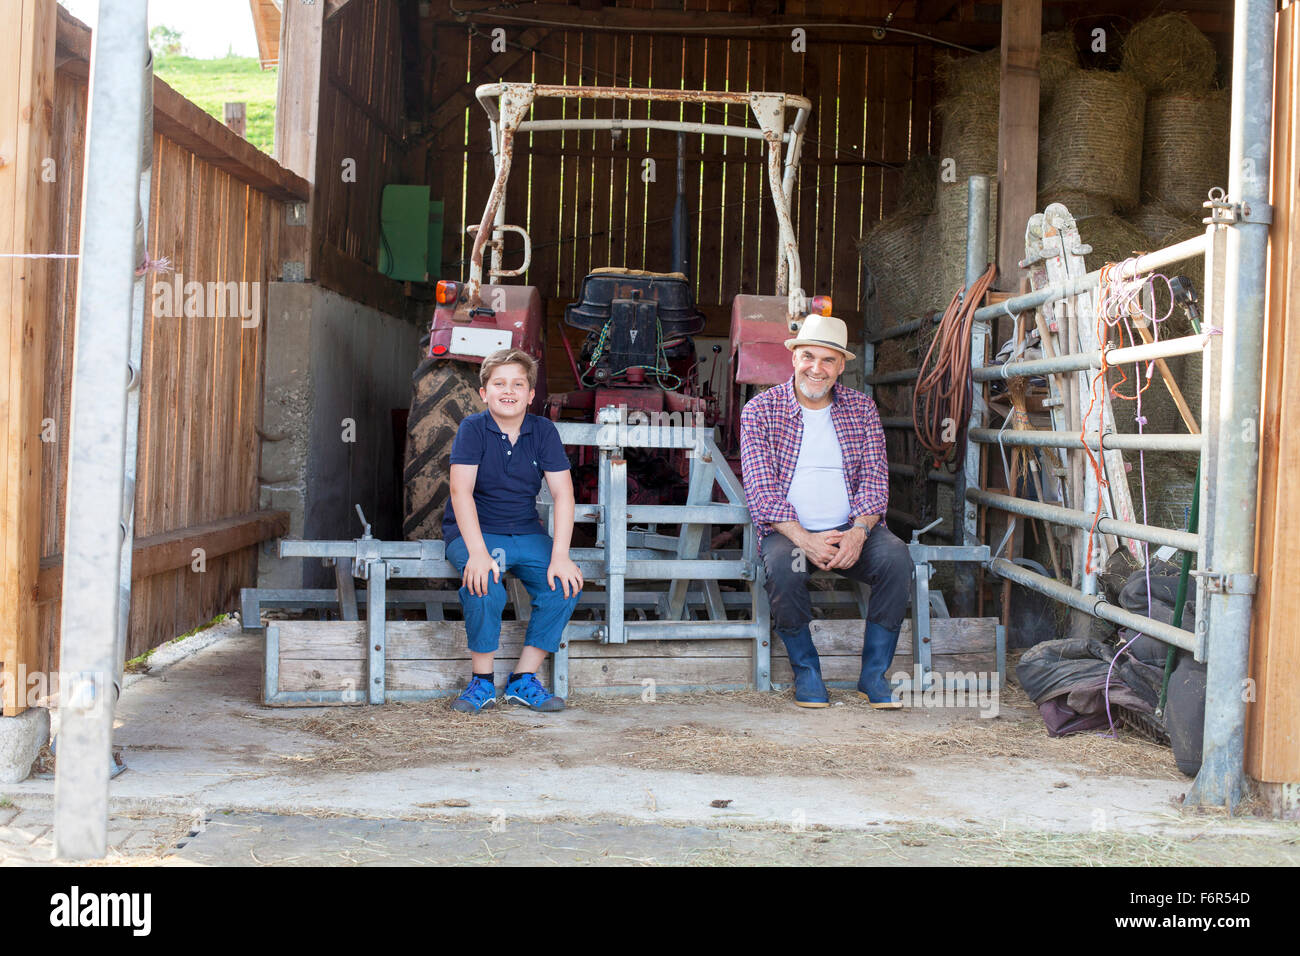 Grandfather and grandson taking a break in stable Stock Photo